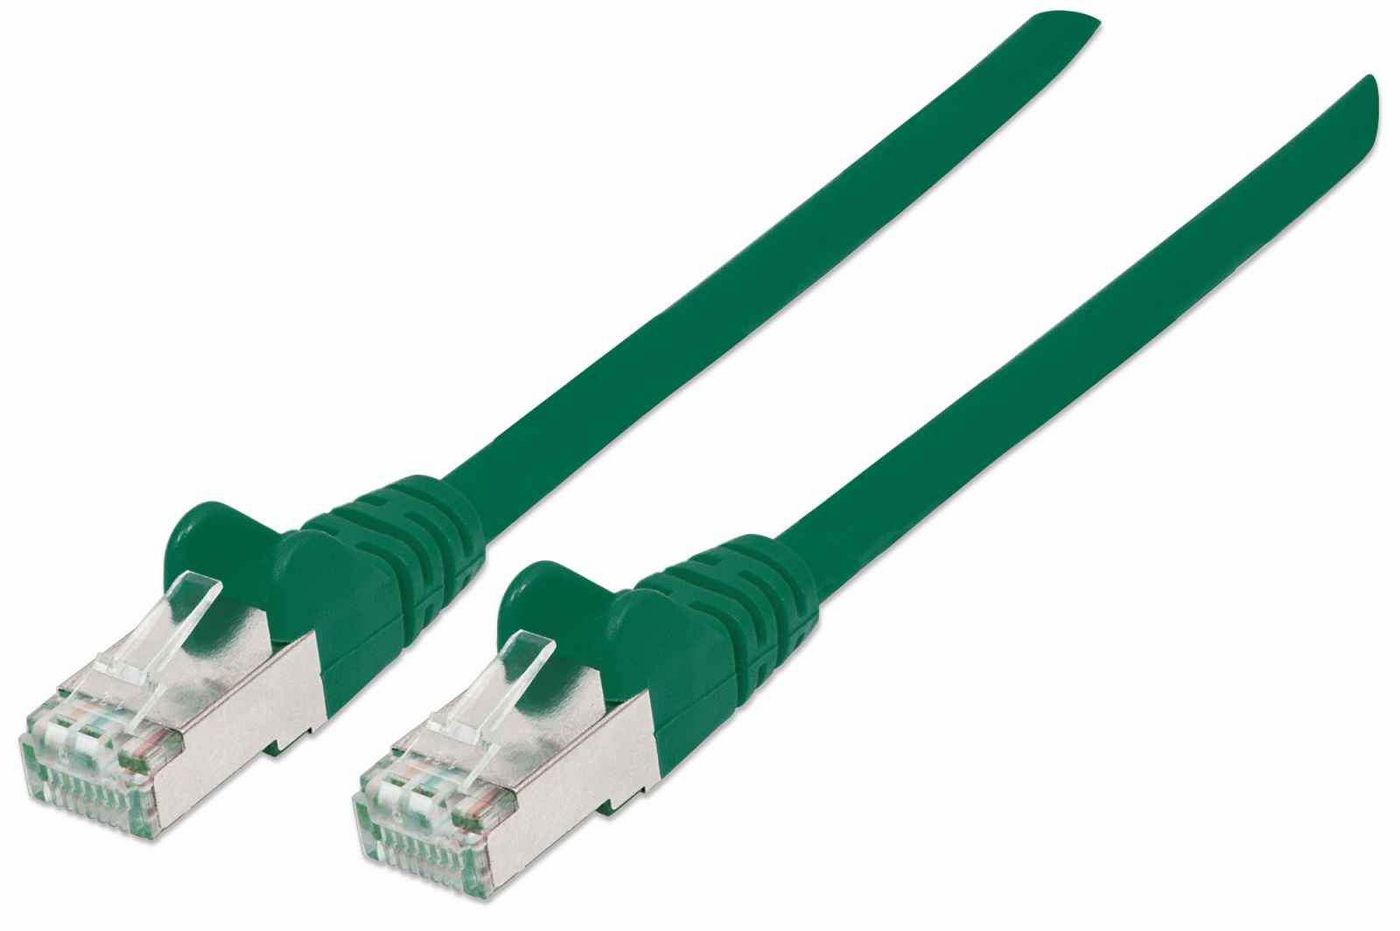 Intellinet 741026 High Performance Network Cable 